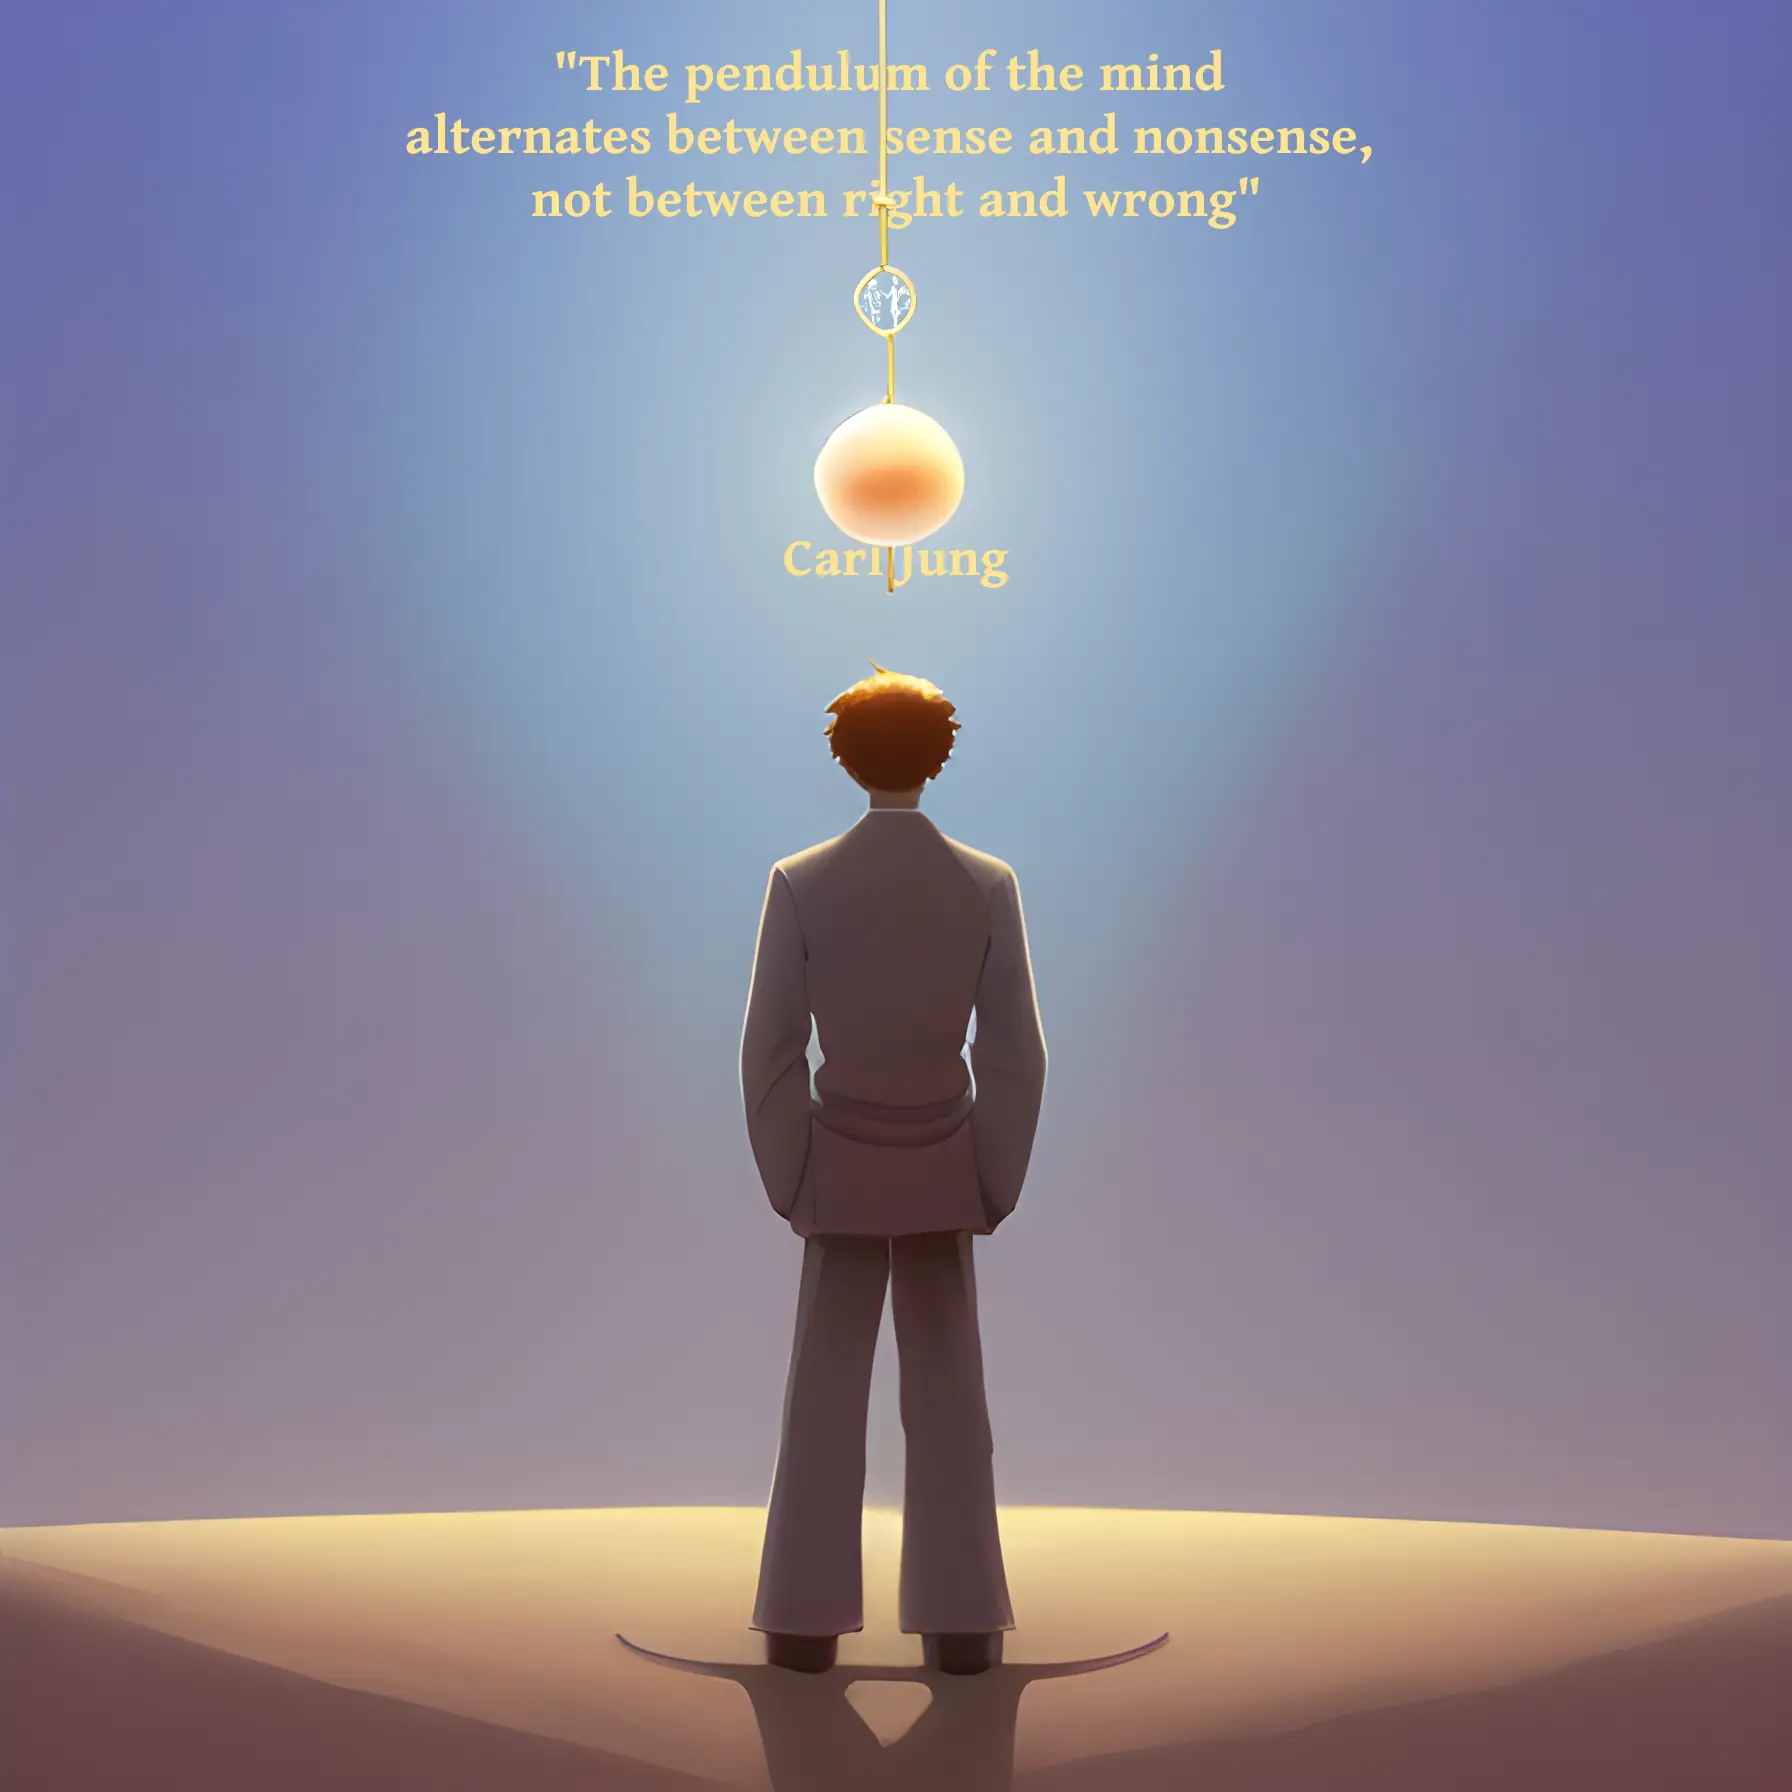 A man stands looking forward into the light. Above and in front of him is a suspended ball, like a pendulum.